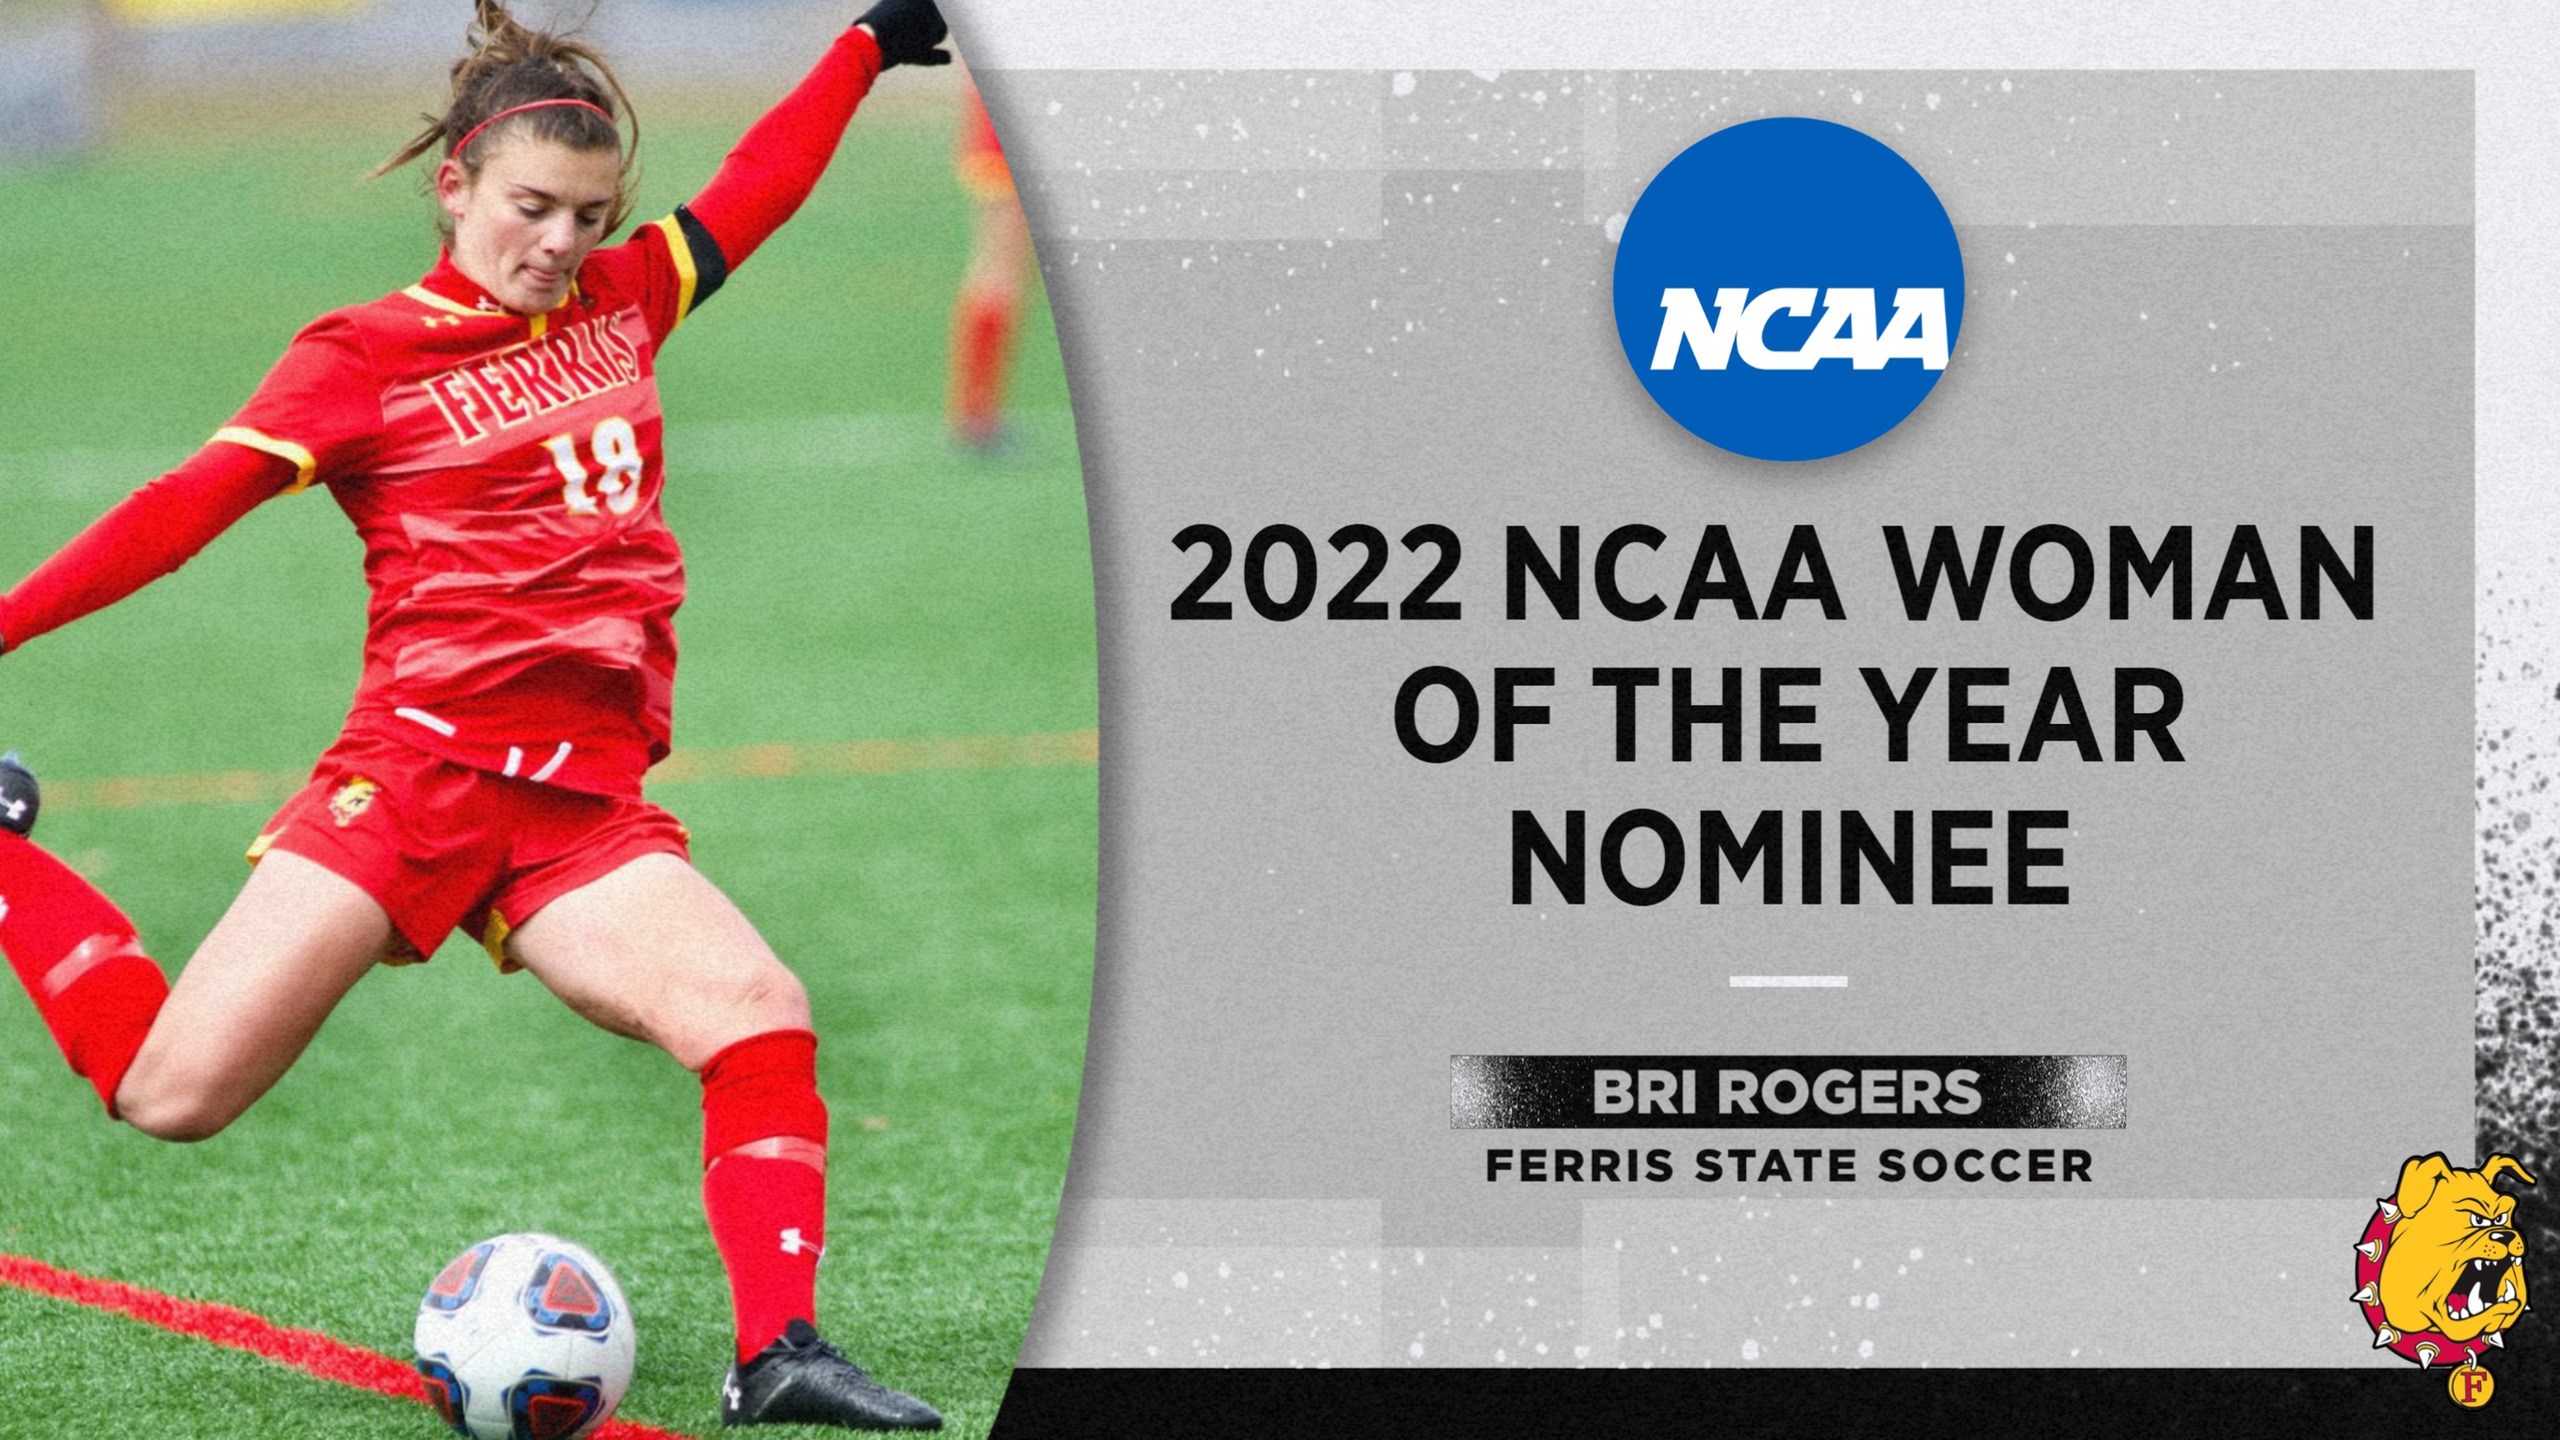 Ferris State's Bri Rogers Tabbed As Nominee For 2022 NCAA Woman of the Year Award